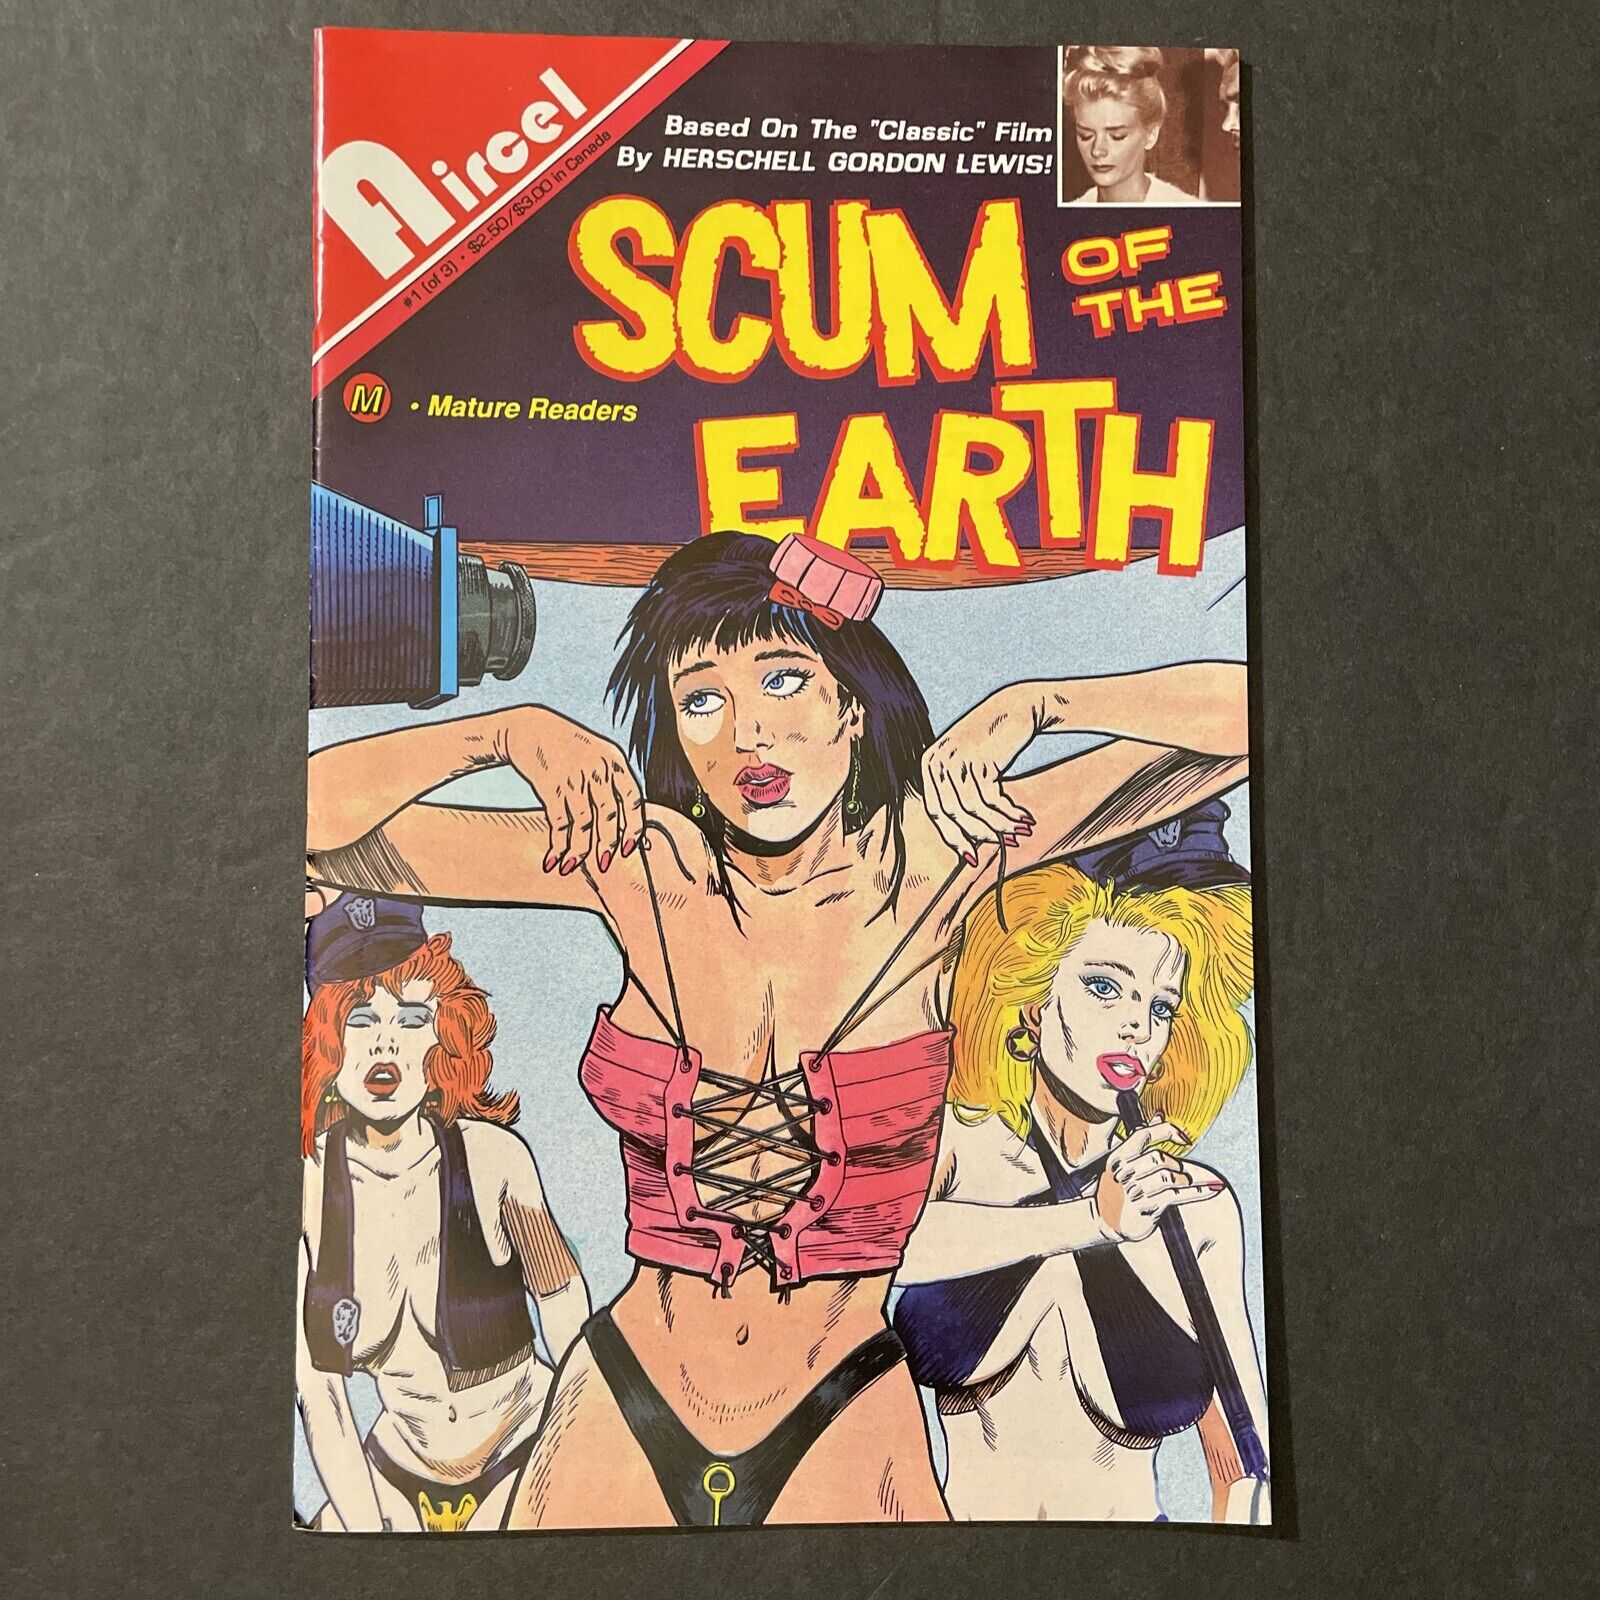 Scum Of The Earth 1 1991 Aircel Malibu Based Herschell Gordon Lewis' Film MATURE